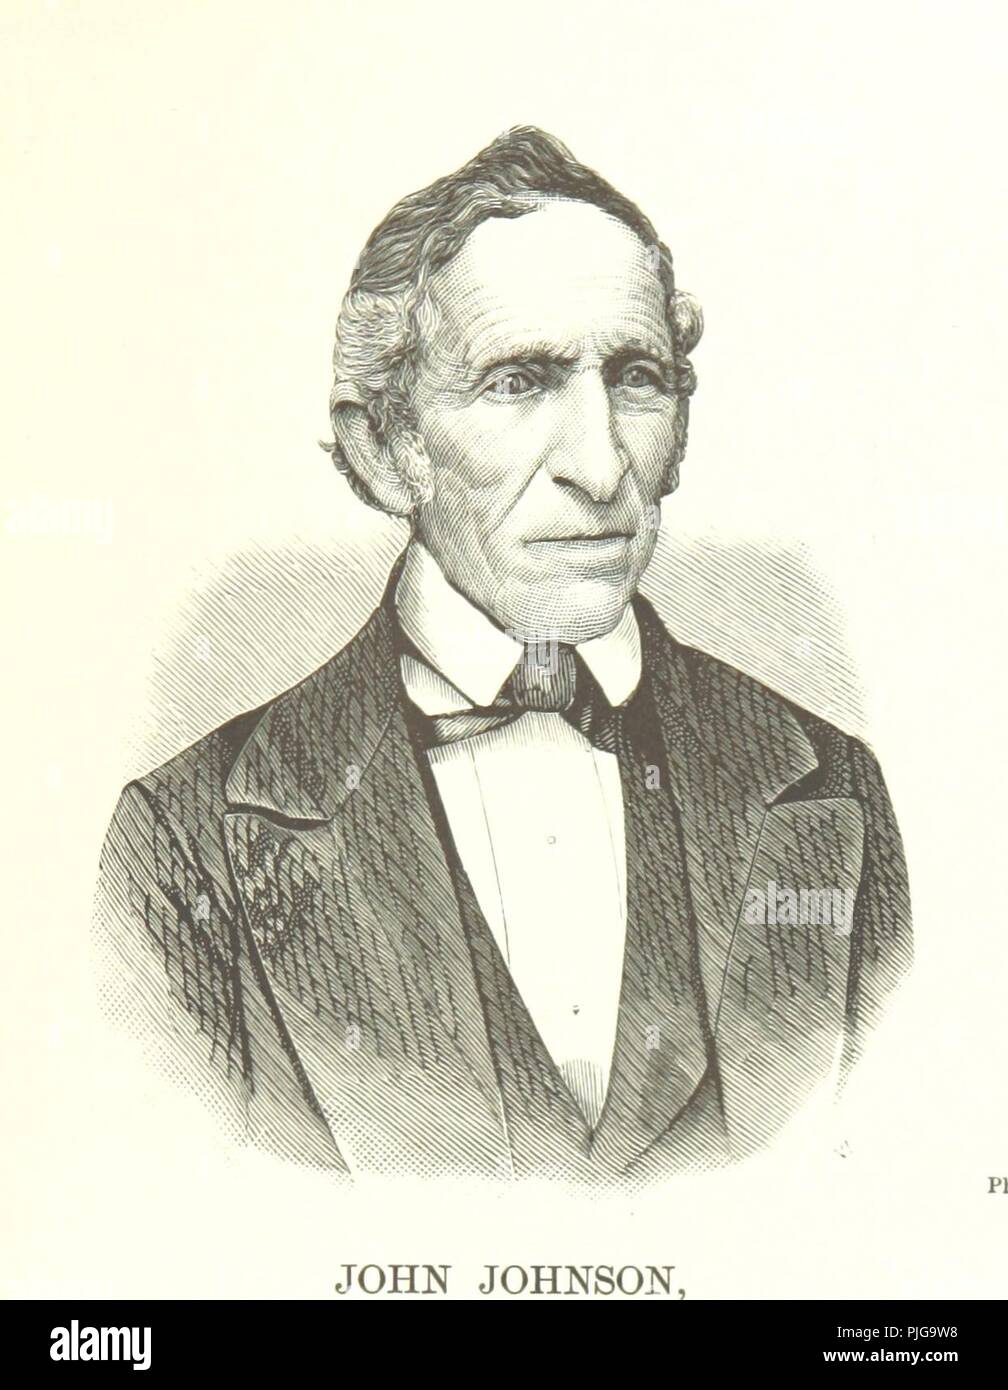 https://c8.alamy.com/comp/PJG9W8/image-from-page-231-of-history-of-york-county-maine-with-illustrations-and-biographical-sketches-of-its-prominent-men-and-pioneers-PJG9W8.jpg